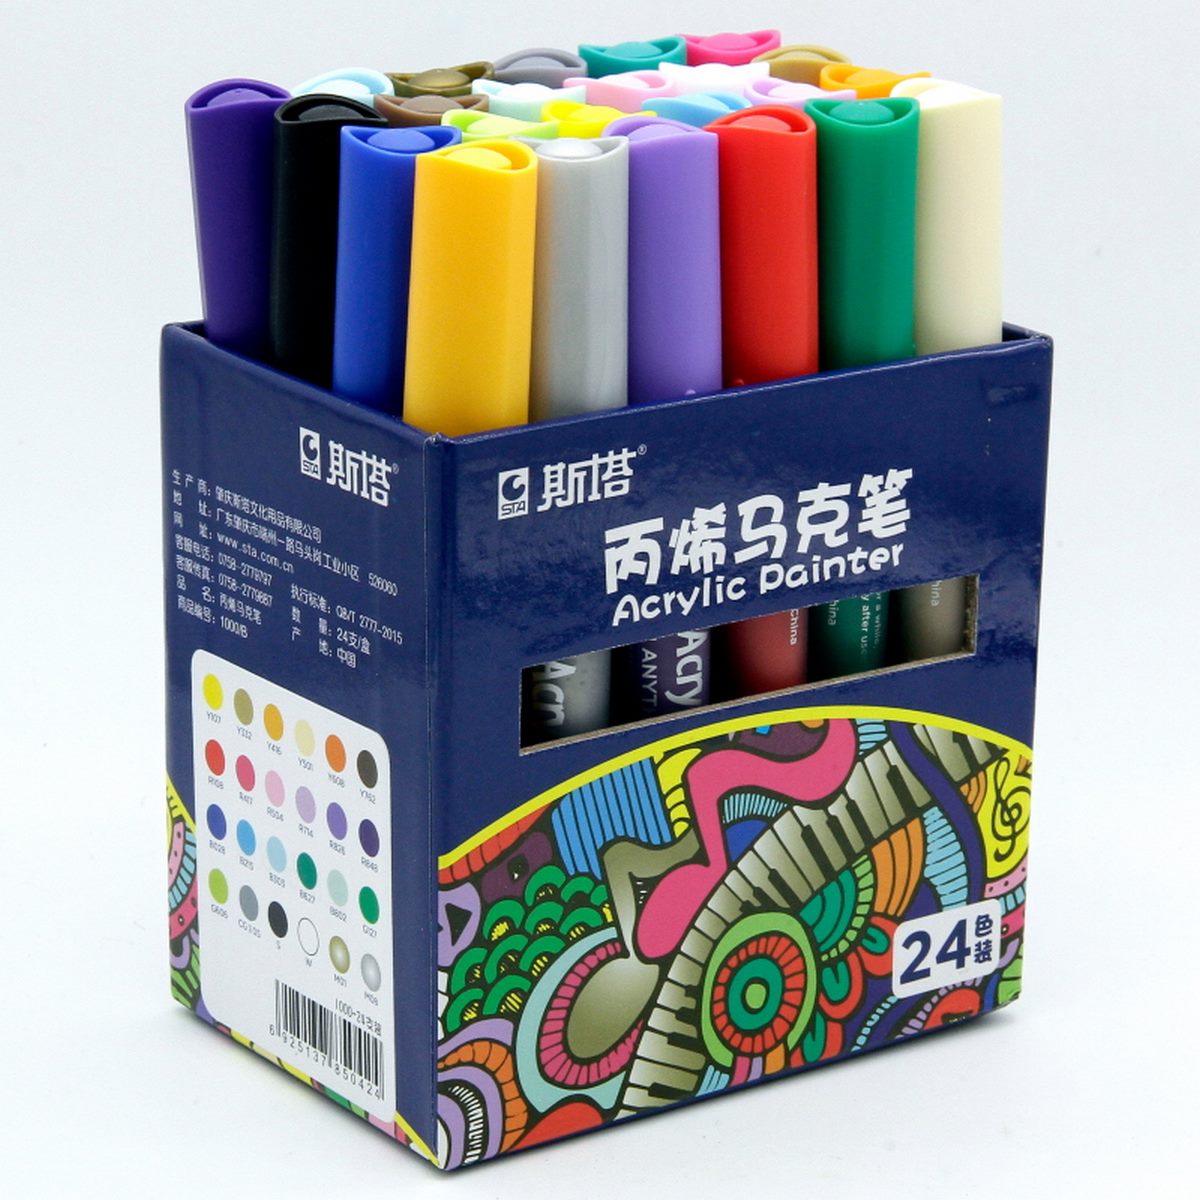 jags-mumbai Marker Acrylic Painter Marker 24 Colour Set  - Versatile and Pigmented Acrylic Paint Markers for Any Surface 1000-24